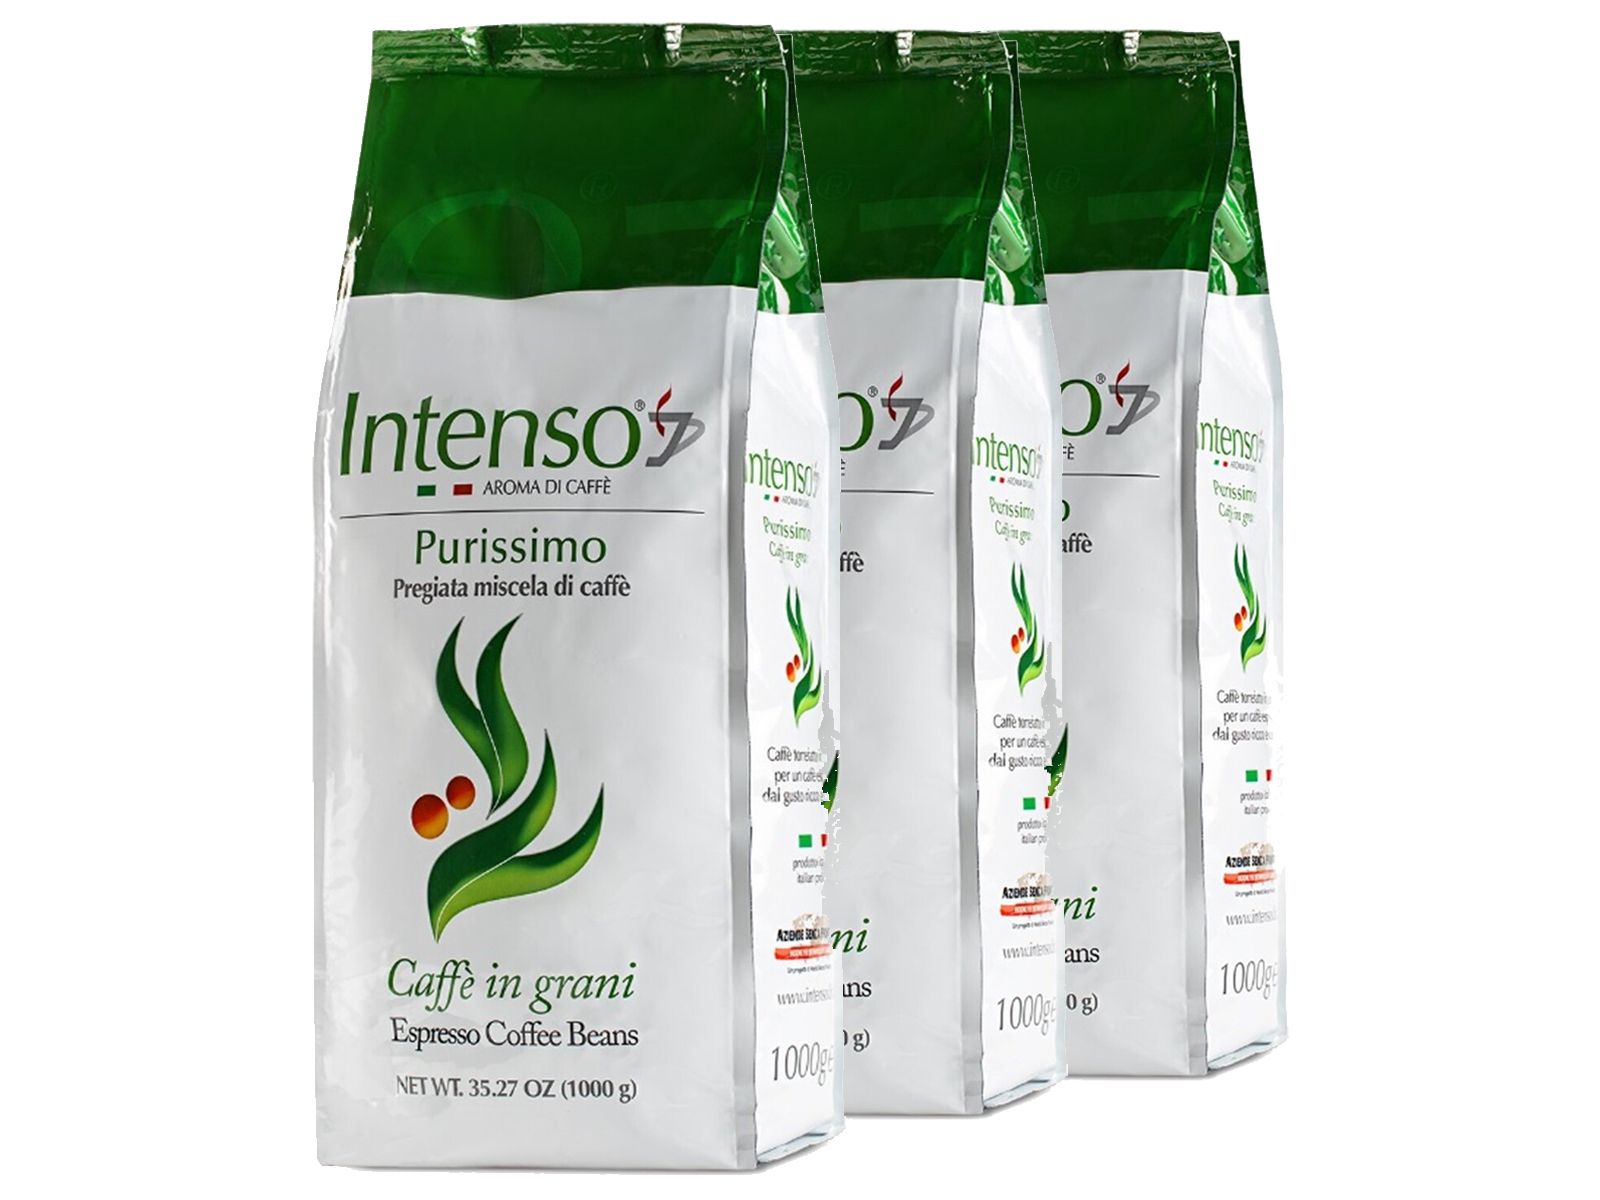 3x-intenso-purissimo-koffie-1-kg